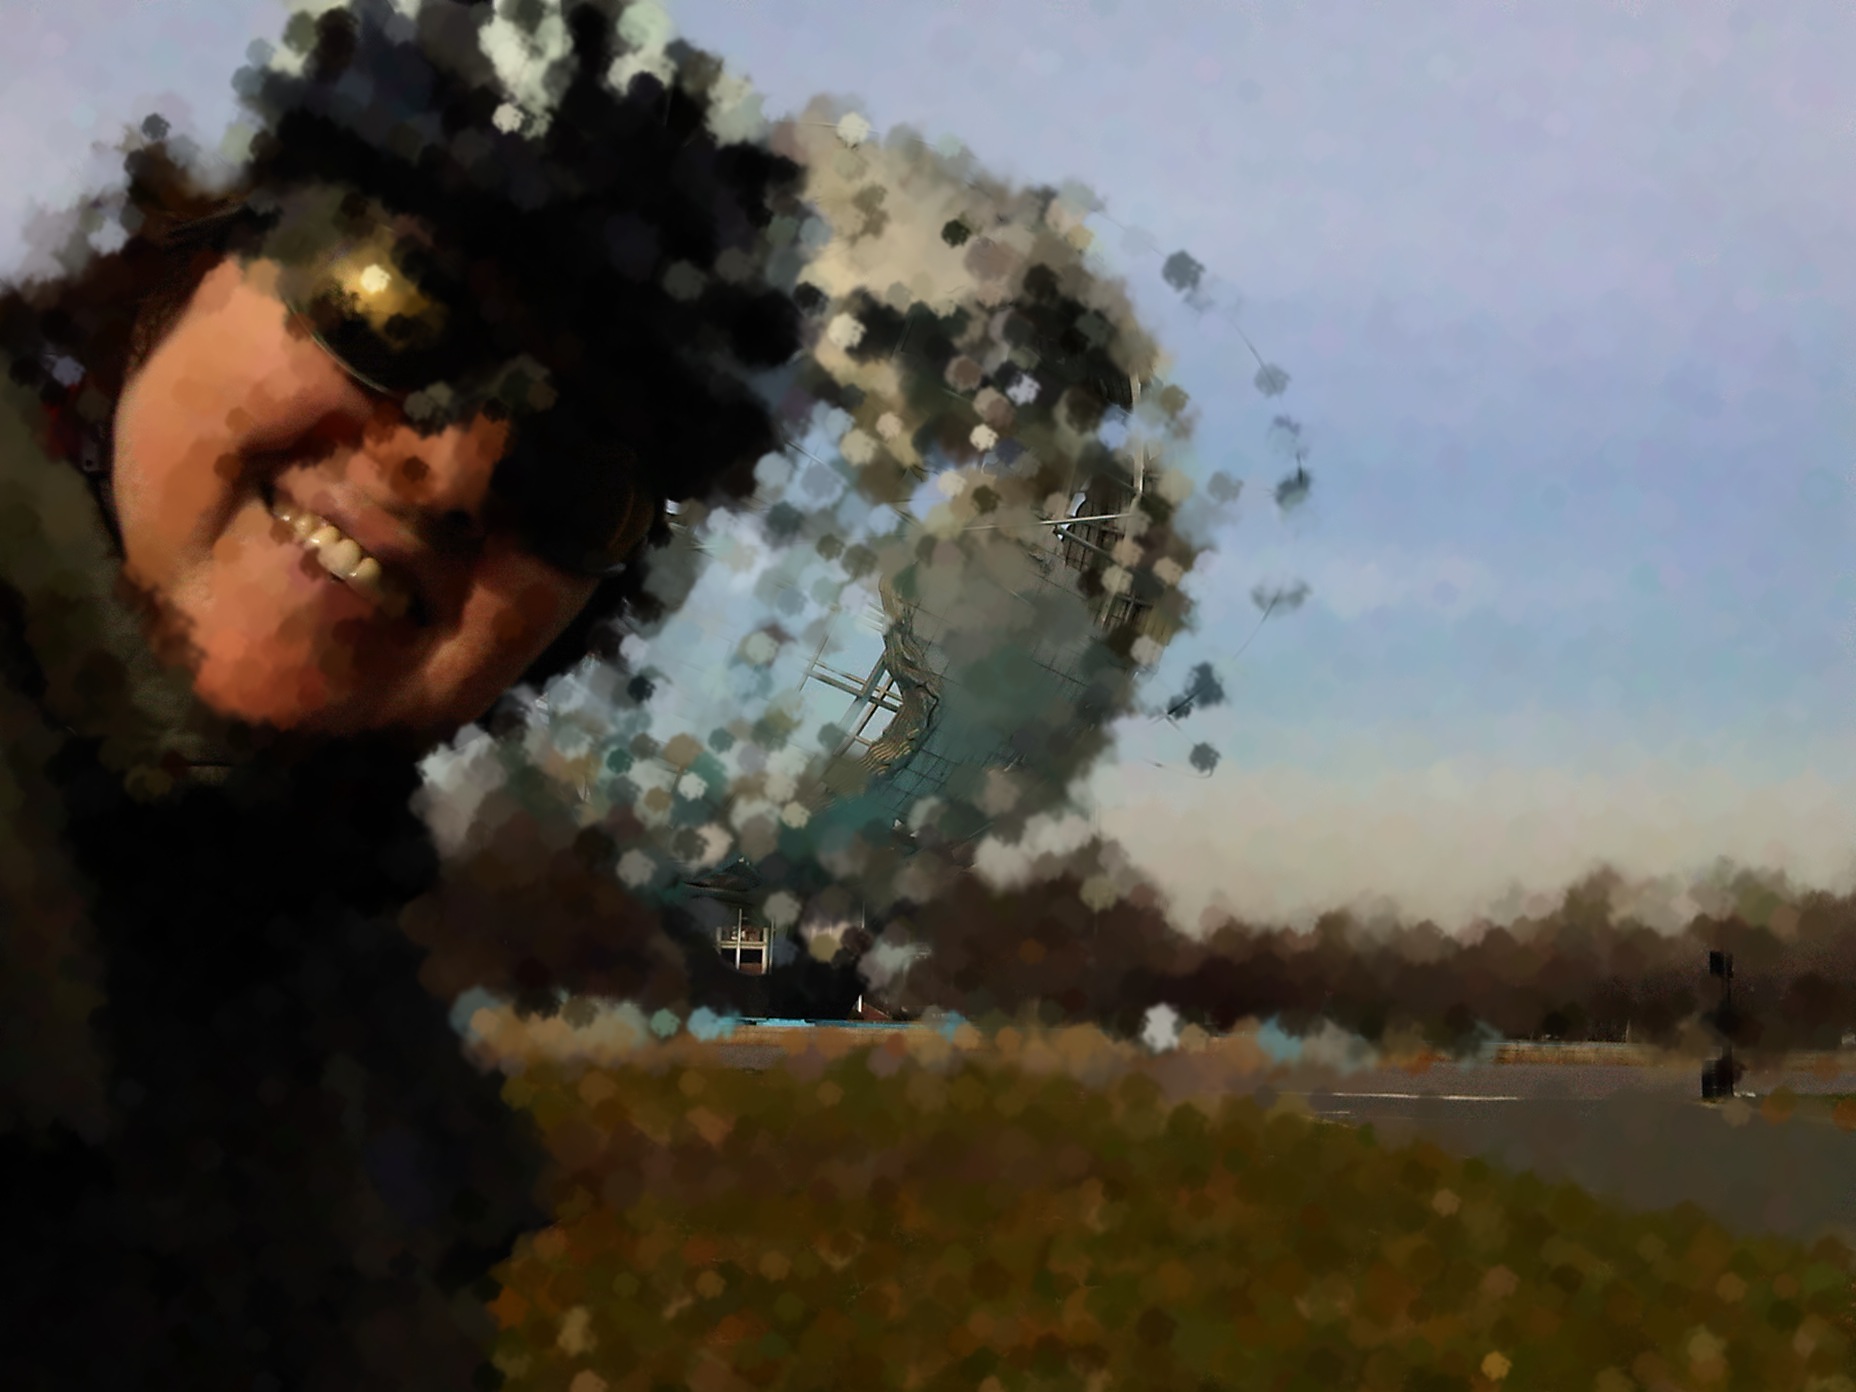 Me on bike at old Worlds Fair site artified.jpg